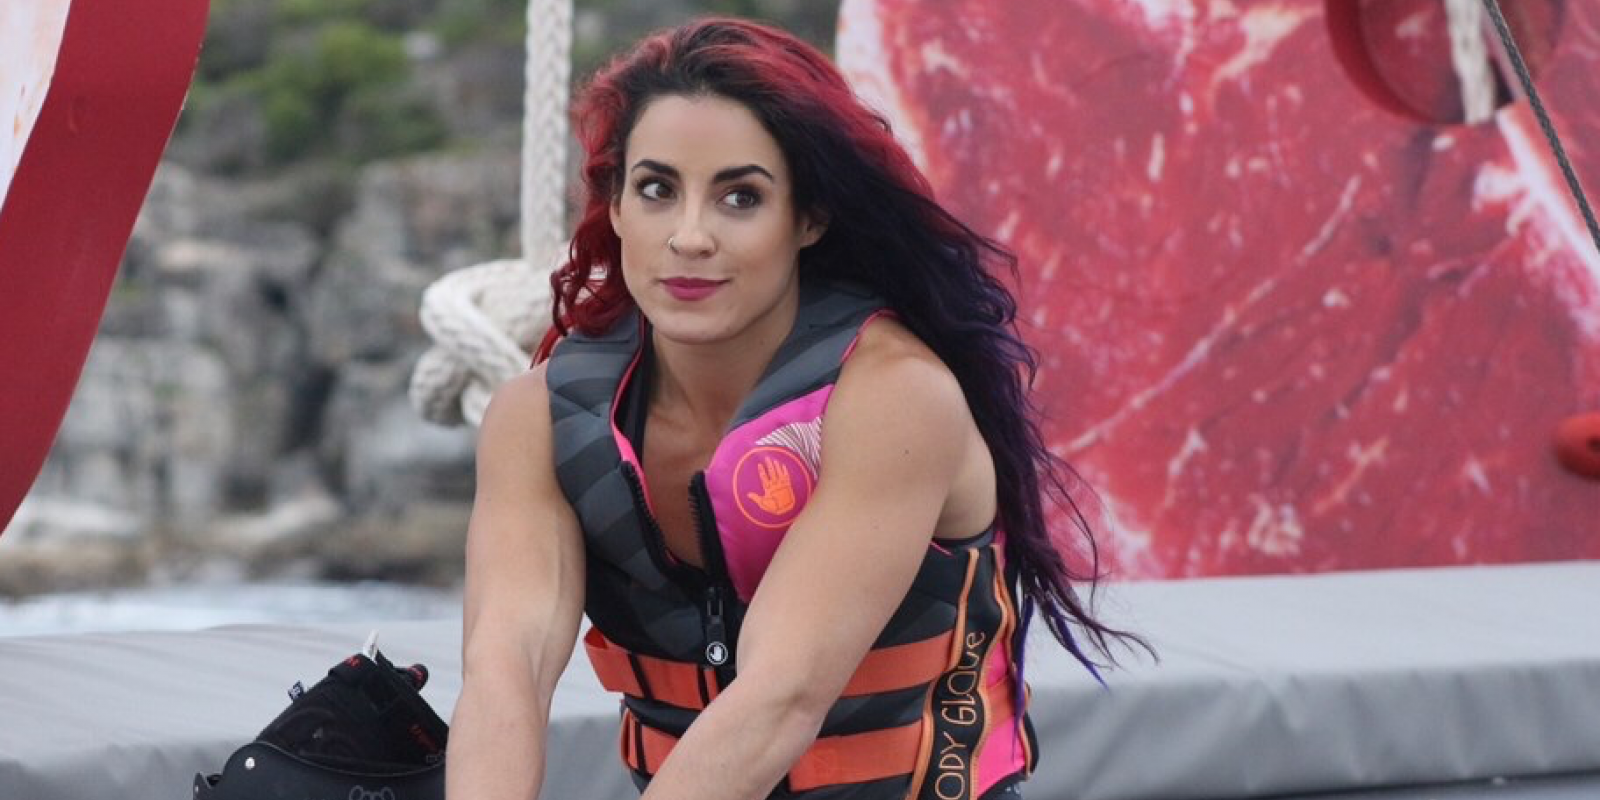 Cara Maria Sorbello competing on The Challenge